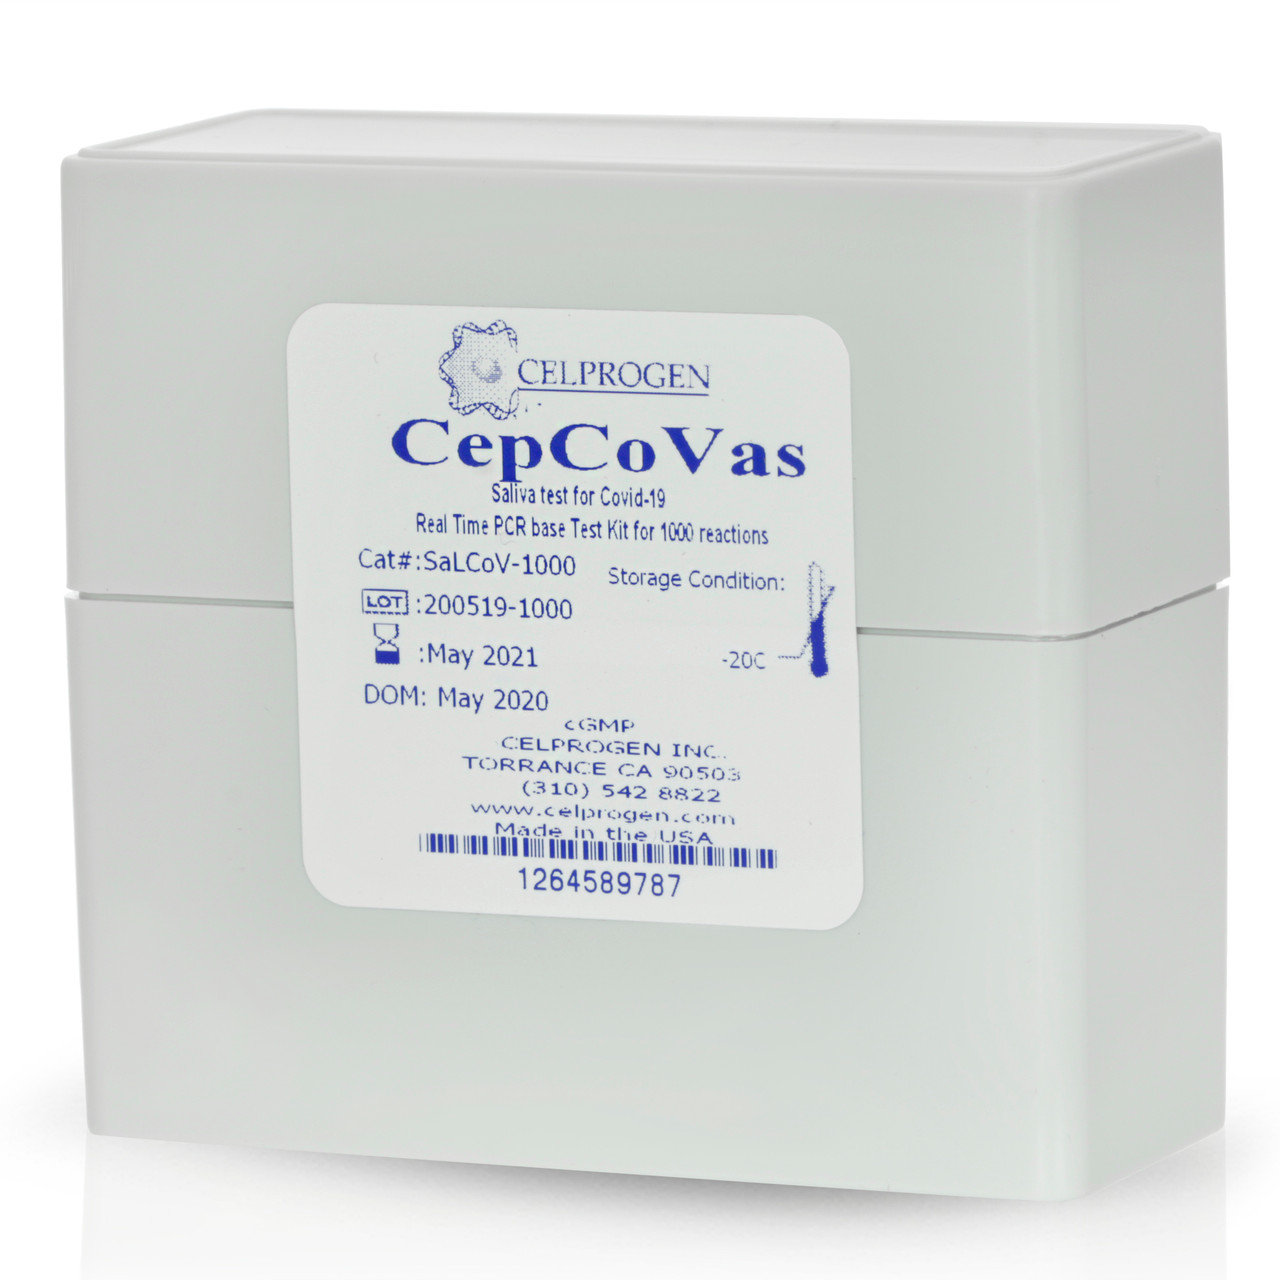 COVID-19 RT-PCR Saliva test kit for 1000 reactions